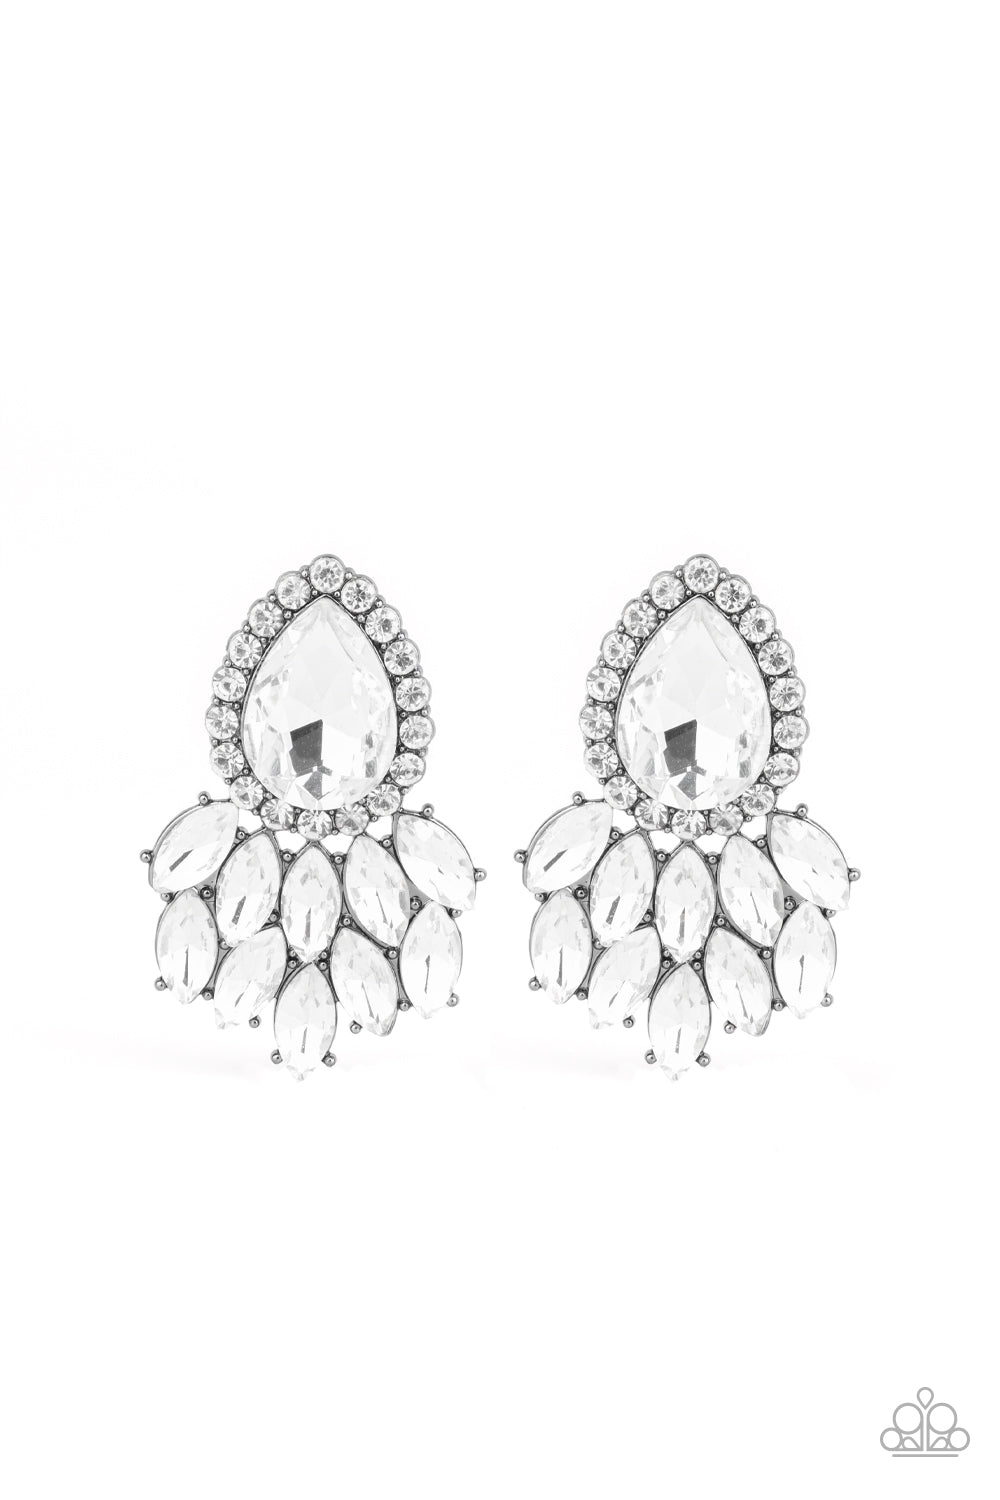 Glassy white marquise style rhinestones cascade from the bottom of a dramatically oversized white teardrop gem, coalescing into a regal frame. Earring attaches to a standard post fitting.